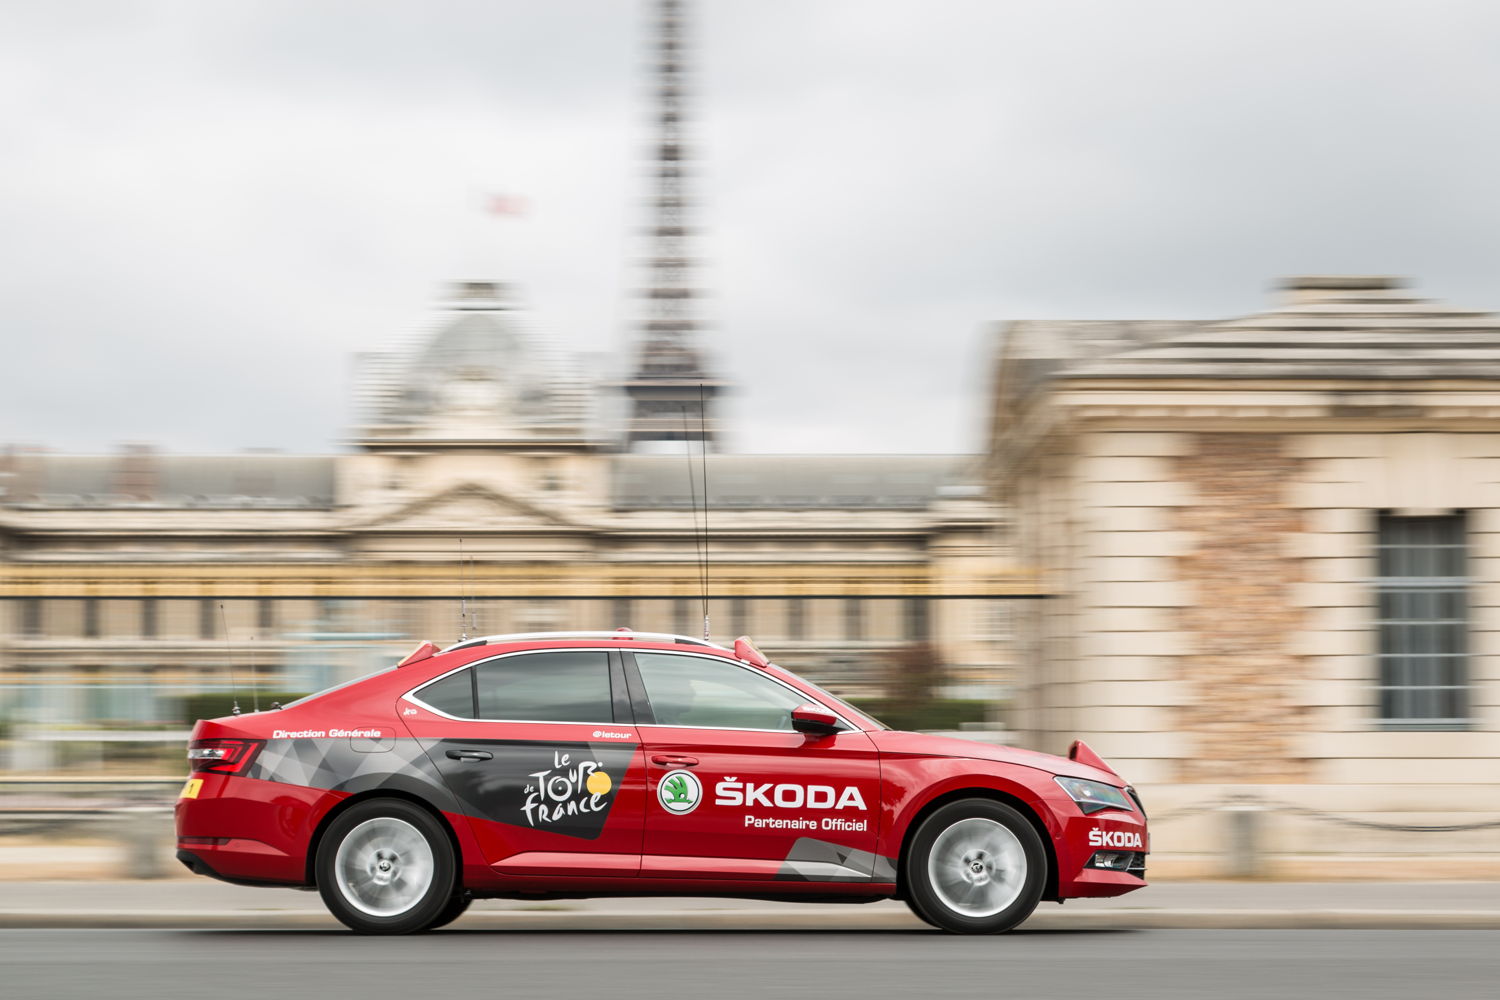 Four ŠKODA Superbs will be used as the ‘Red Car’ in this year’s Tour de France.